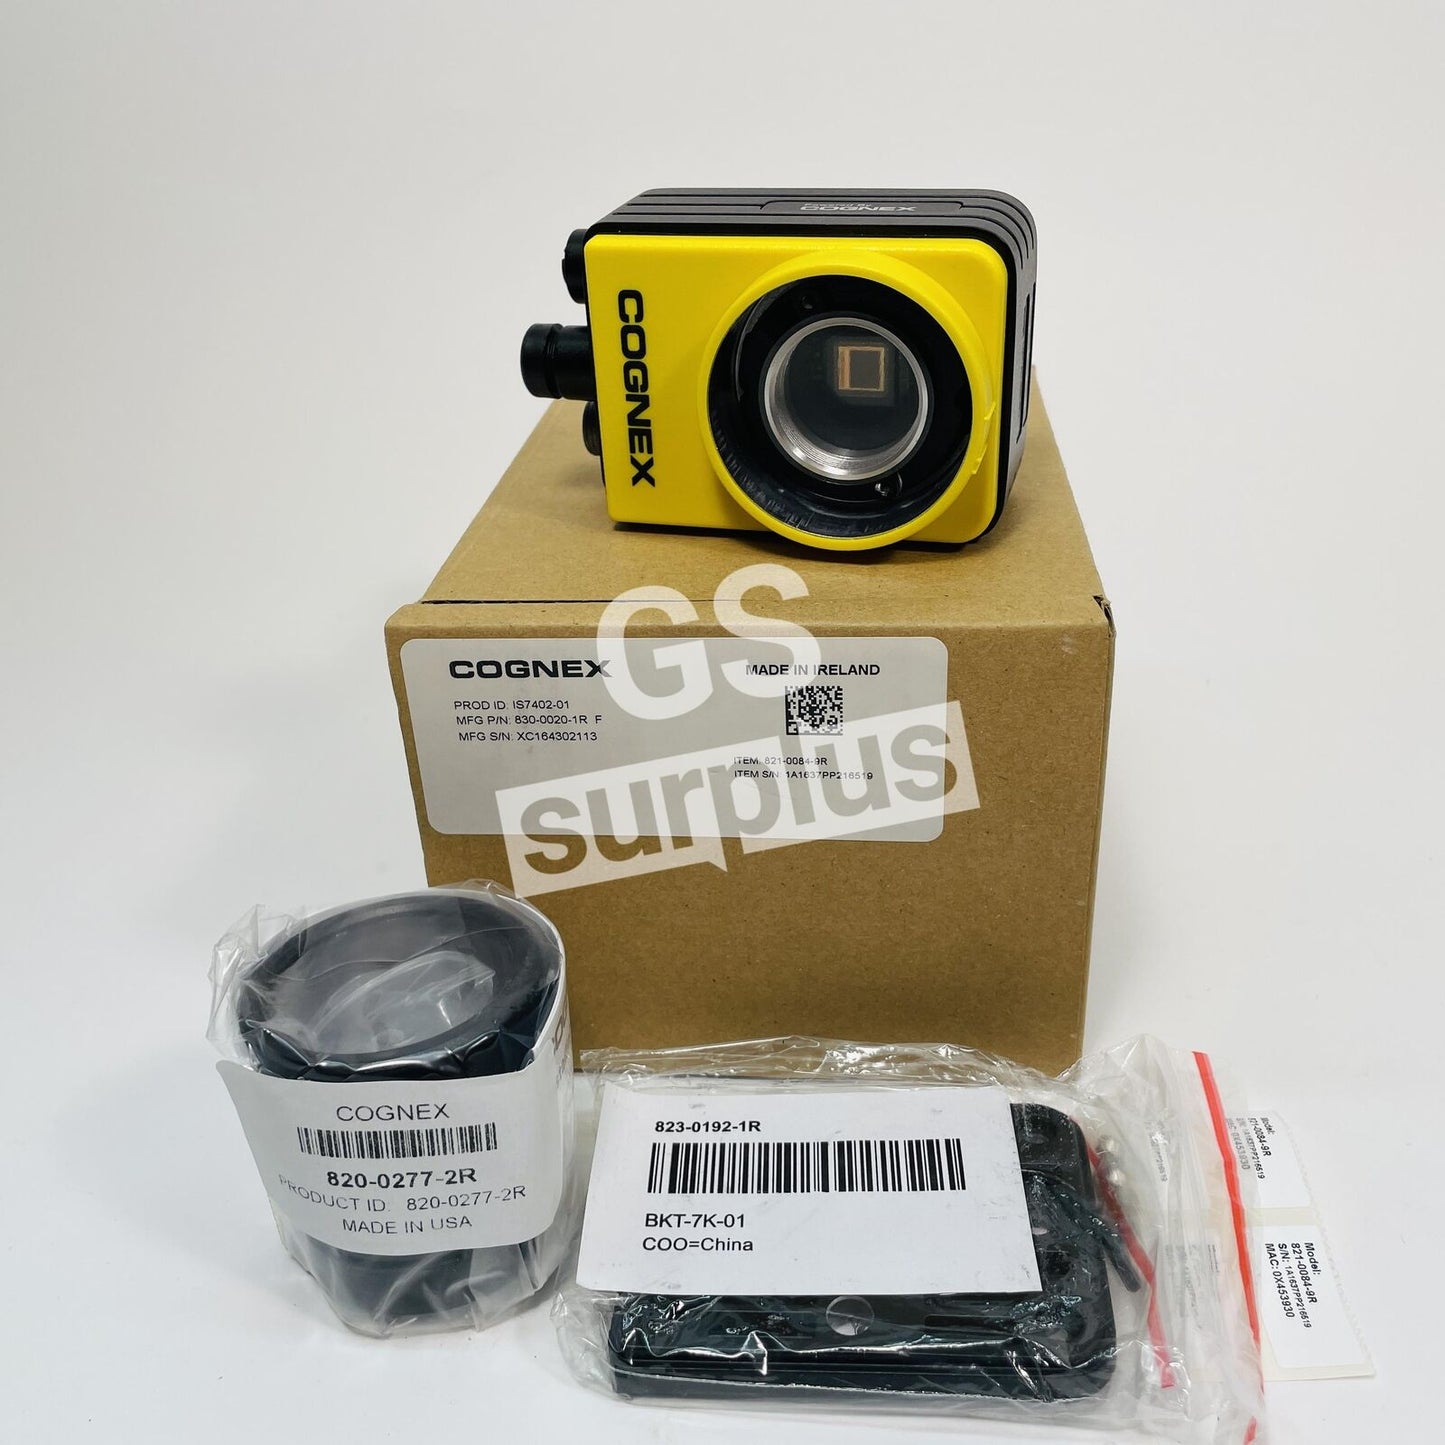 NEW COGNEX IS7402-01 In-Sight Vision Camera  830-0020-1R